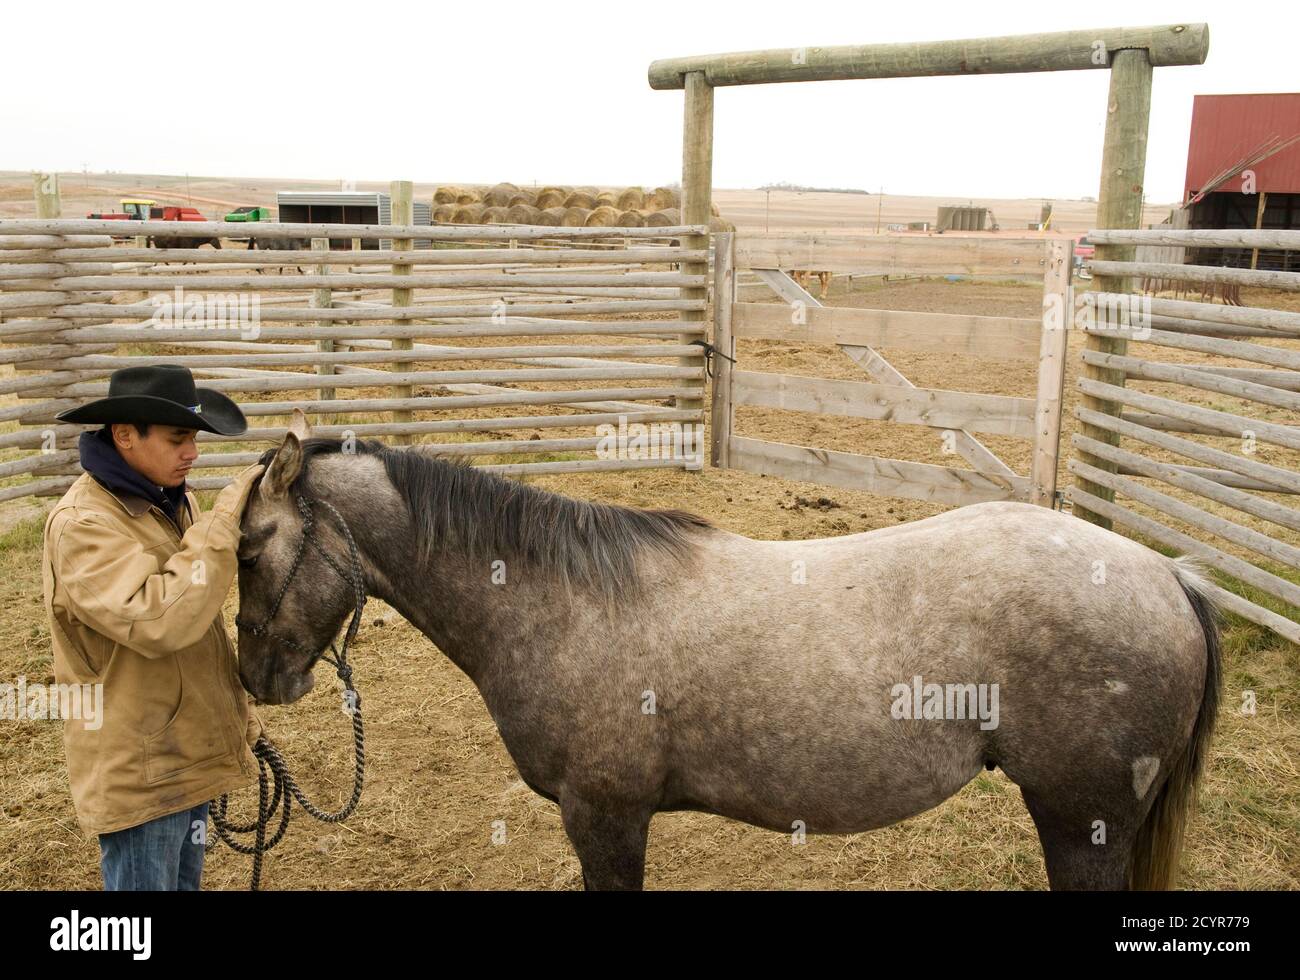 Jesse Bear trains a horse on the ranch owned by his father, a Three Affiliated Tribes member, just off the Fort Berthold Reservation in North Dakota, November 1, 2014. The ranch is now surrounded by oil wells and other infrastructure like the holding tanks visible in the top right corner. The Fort Berthold Indian Reservation, home to the Mandan, Hidatsa, and Arikara Nation, produces nearly a third of North Dakota's oil. The election for a new tribal chairman, in which both candidates have positioned themselves as reformers, may change the oil industry's relationship with the reservation. Photo Stock Photo